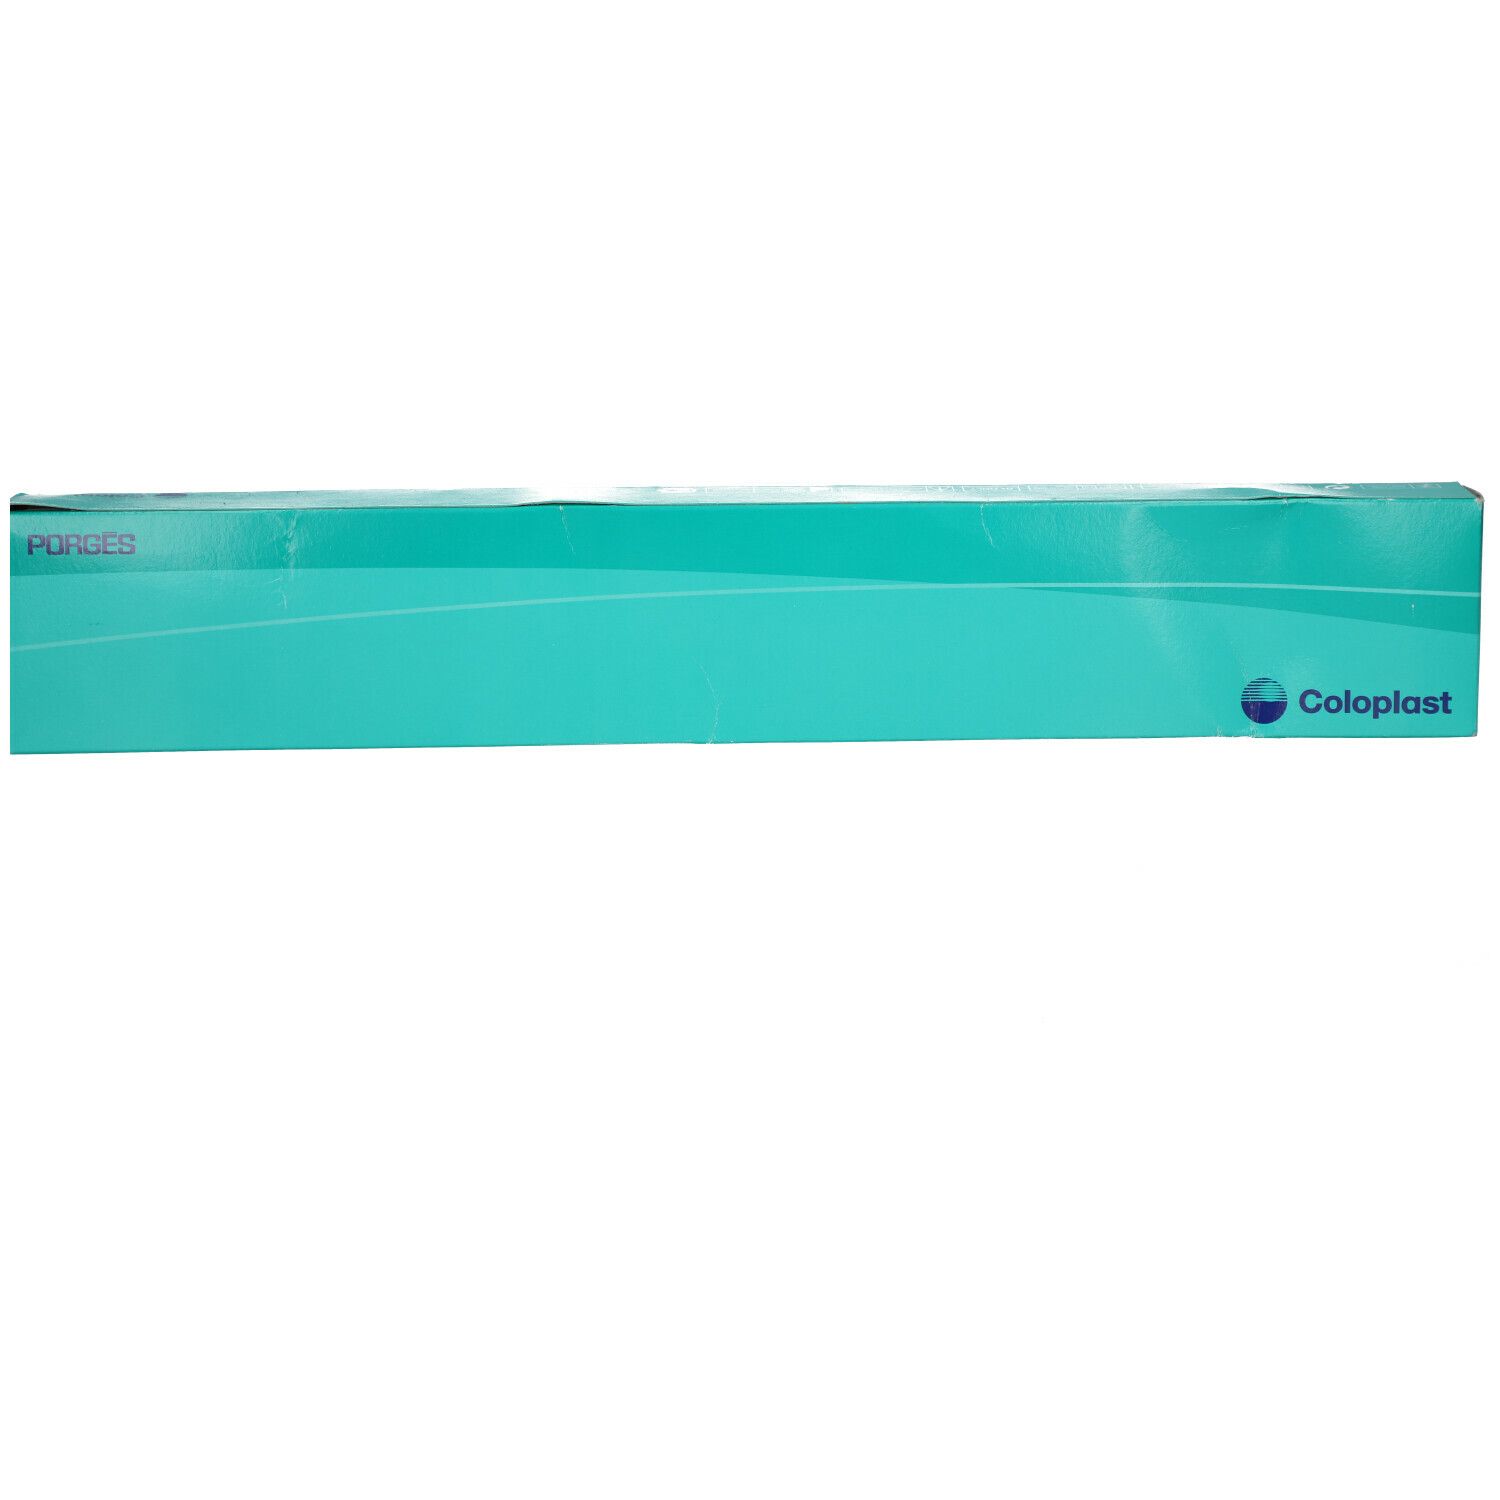 Coloplast Folysil® Cathéter Porges Ch18 15 ml 41 cm Aa6118